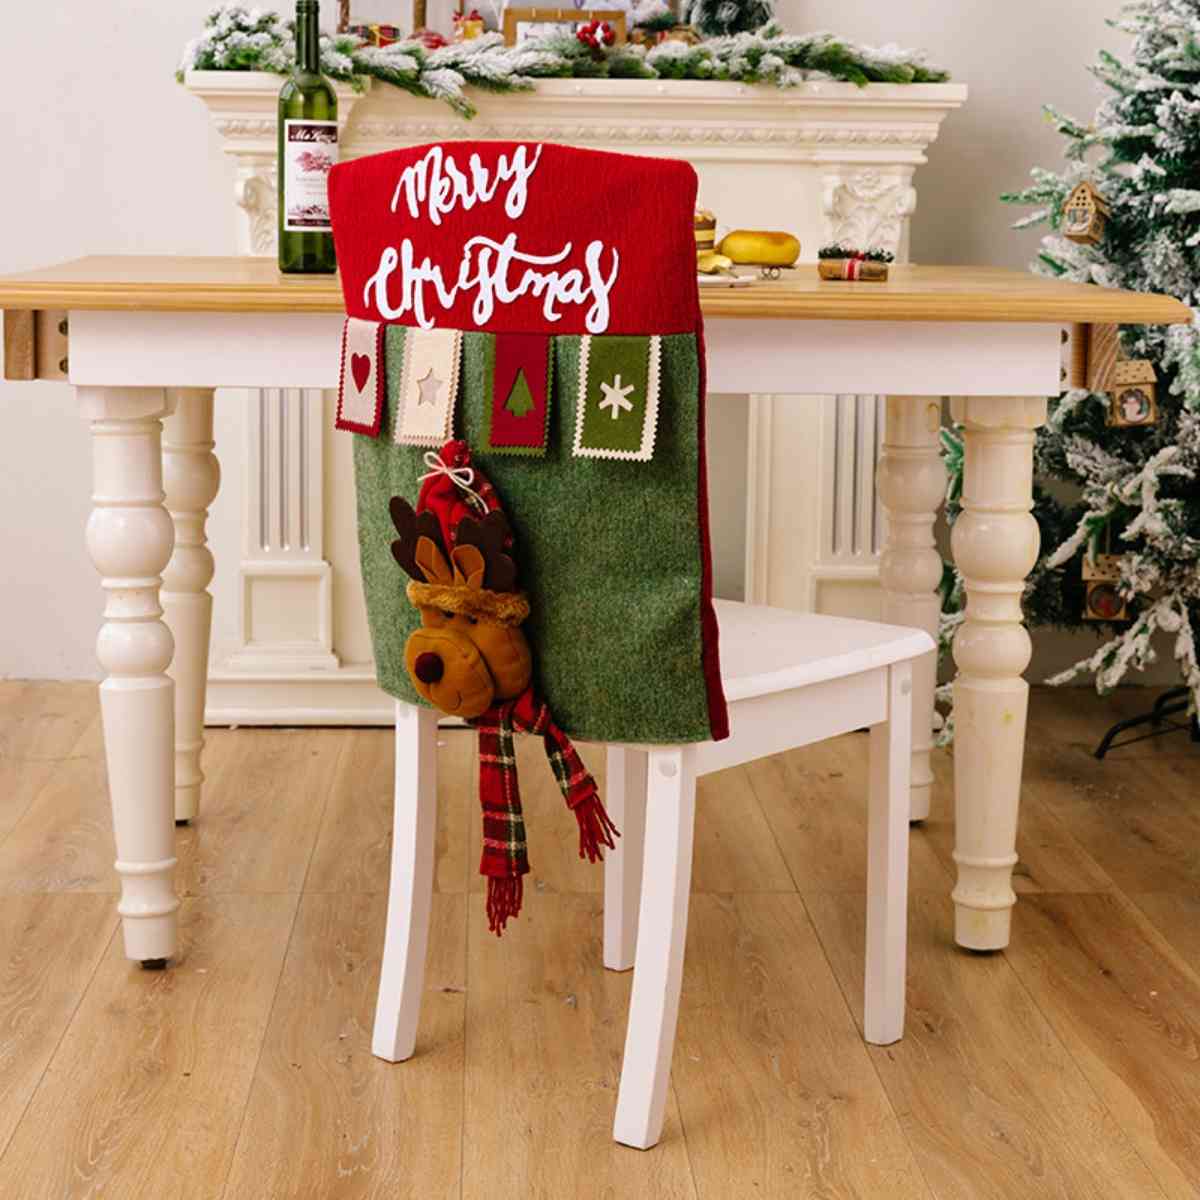 Christmas Chair Cover in Assorted Styles